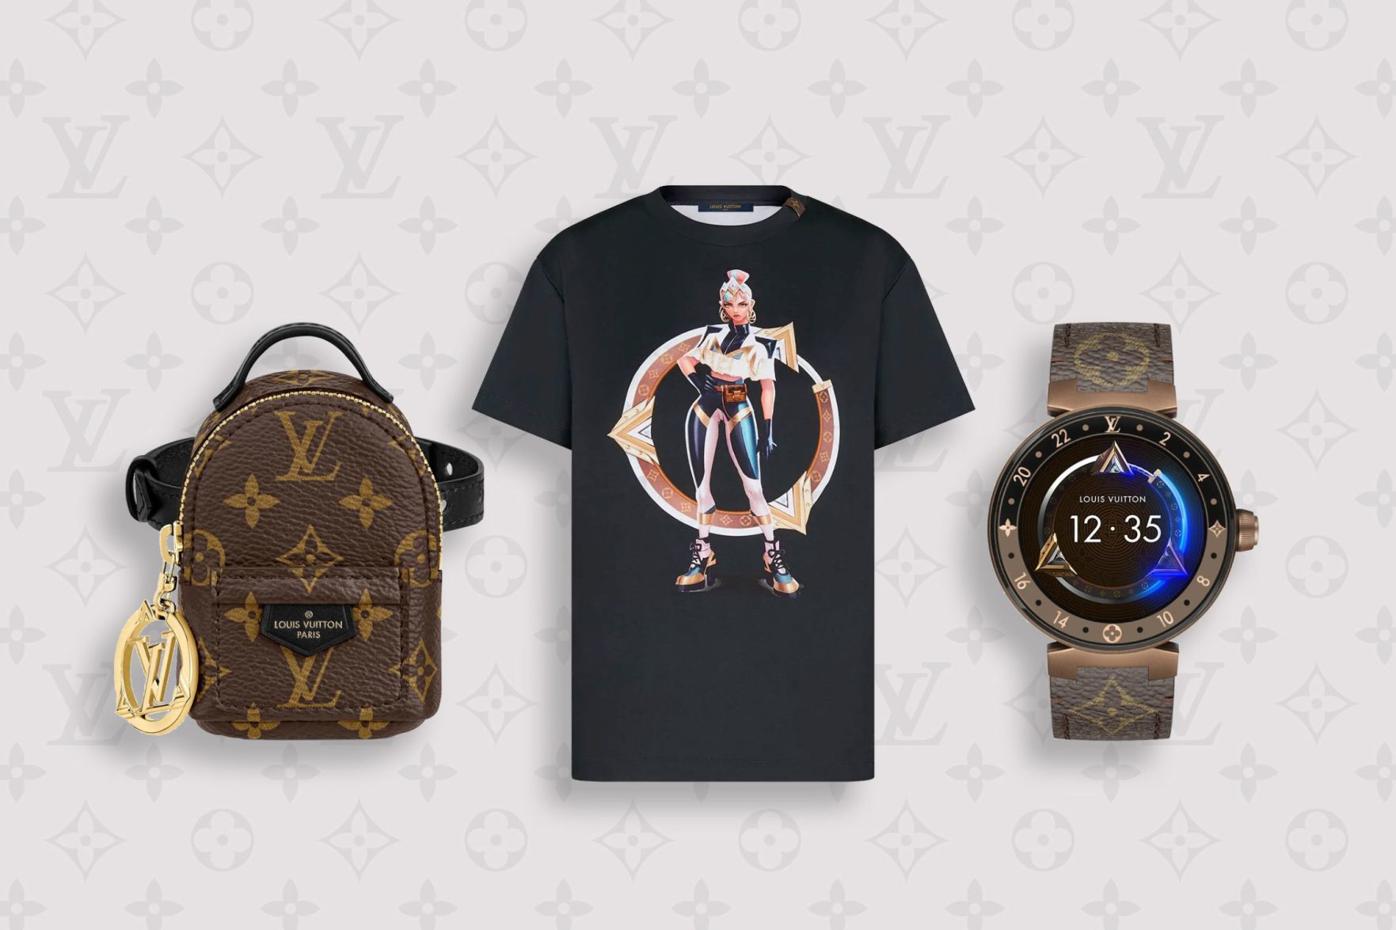 The highs and lows of the Louis Vuitton x League of Legends